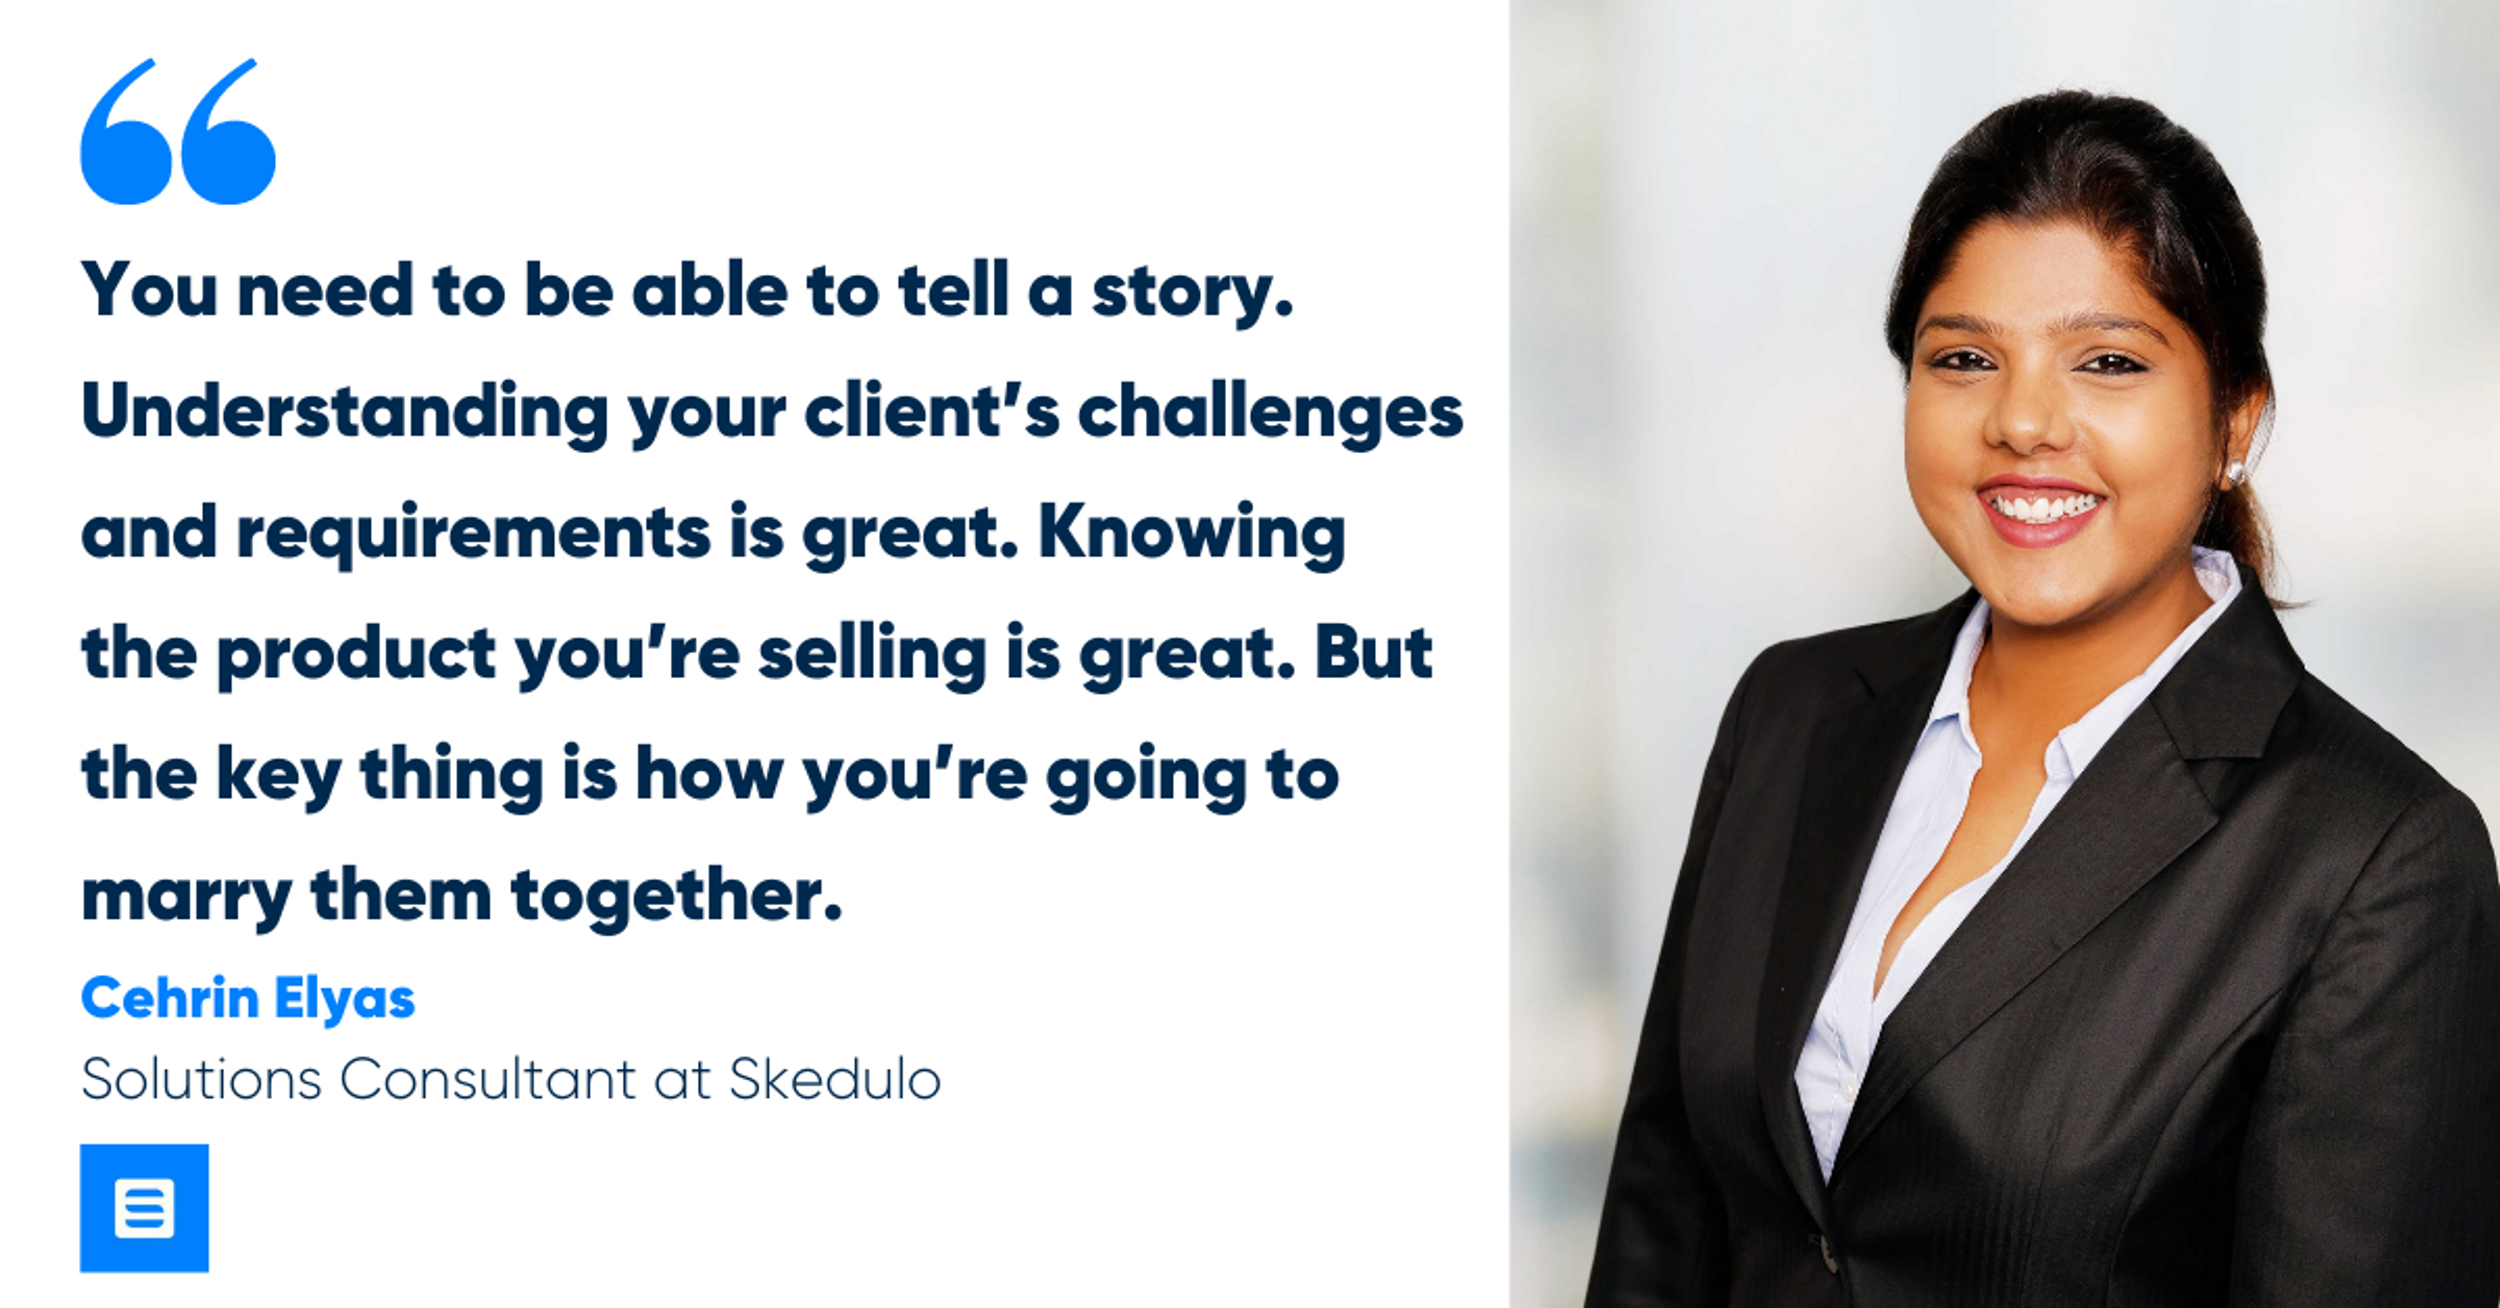 Blog post header with quote from Cehrin Elyas, Solutions Consultant at Skedulo